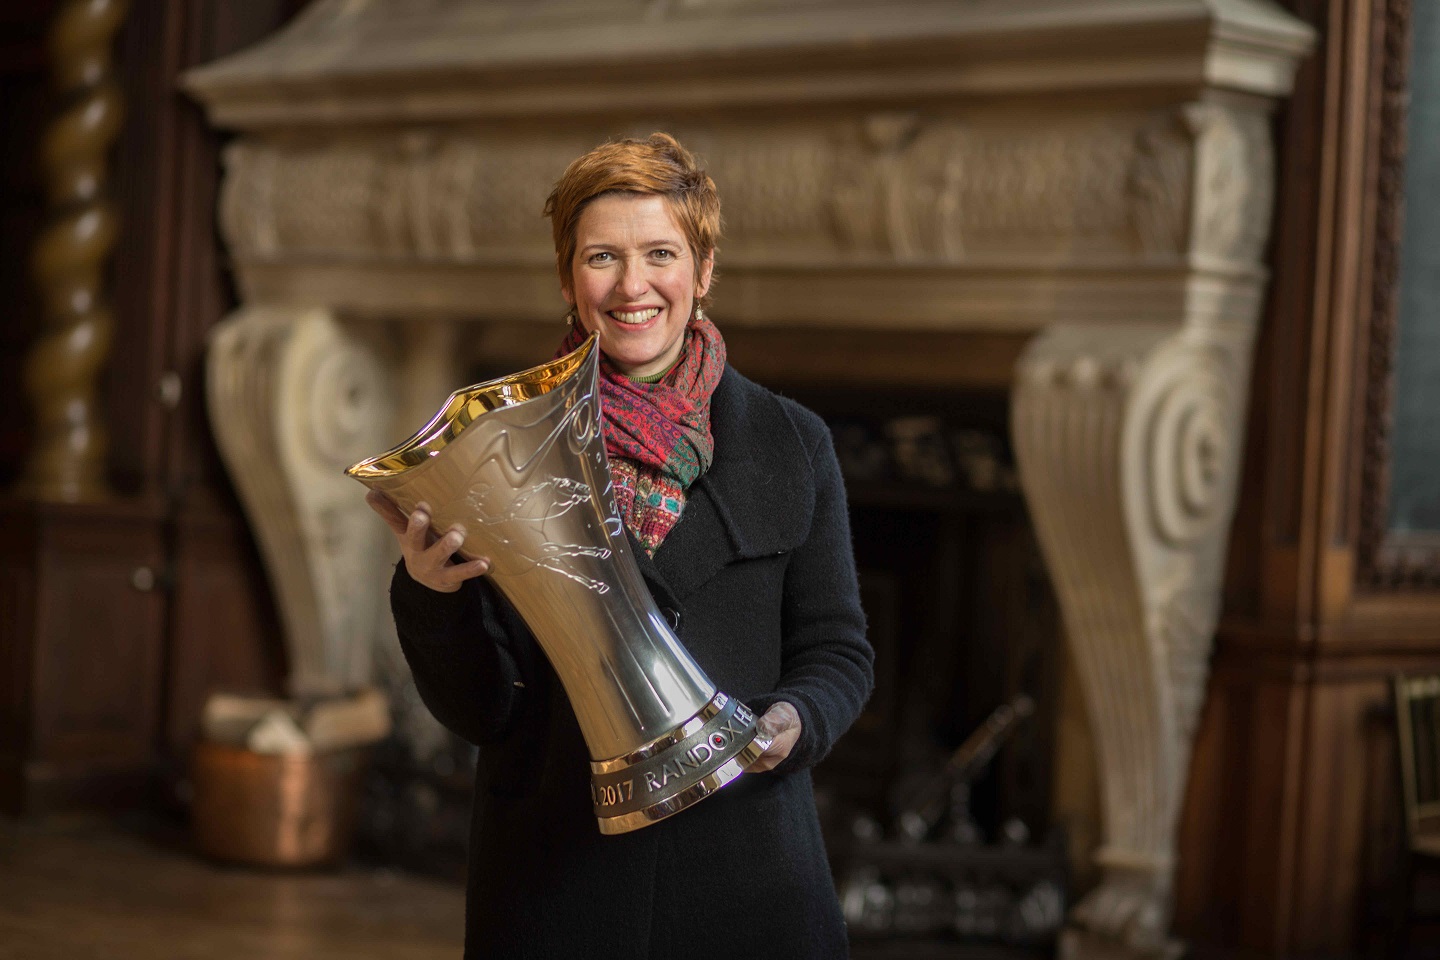 Shannon O'Neill and her Grand National Trophy. Pic: Adrian Salisbury